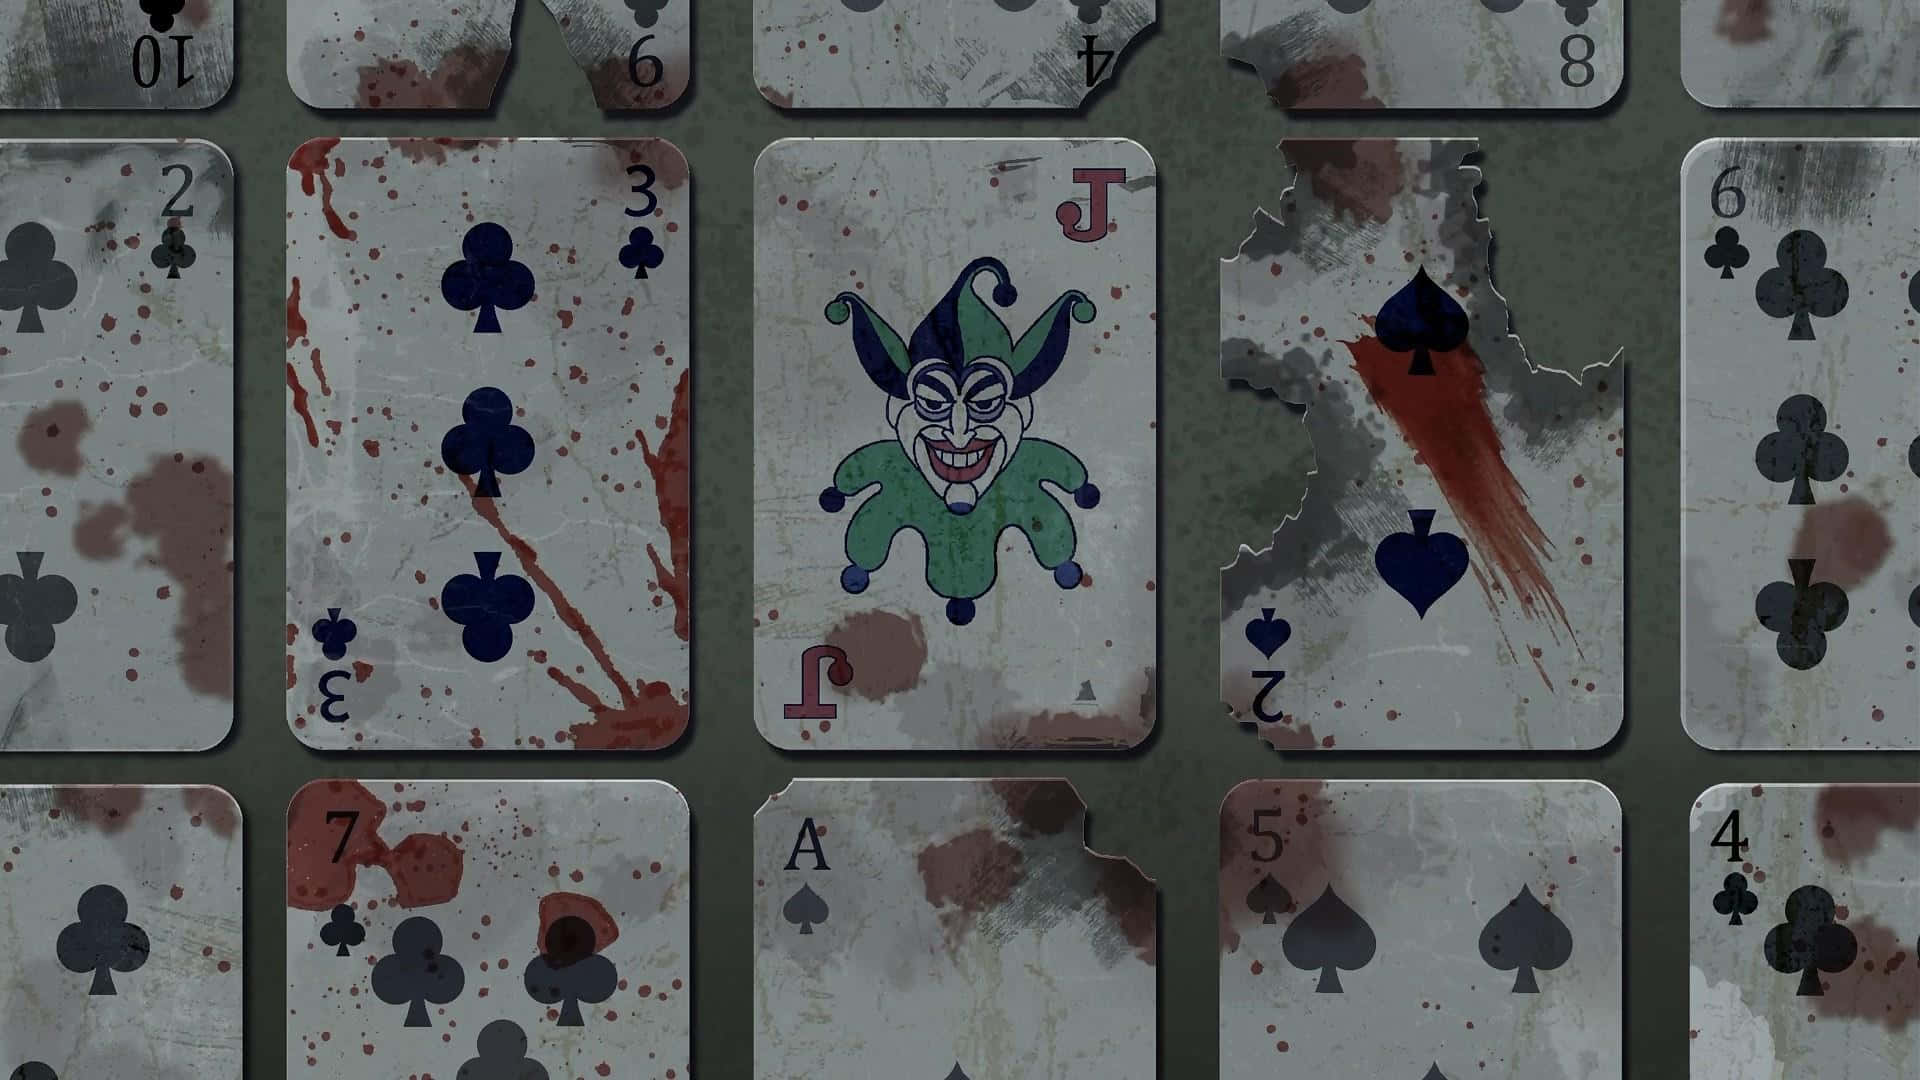 Mysterious Joker playing card in vibrant purple hue Wallpaper